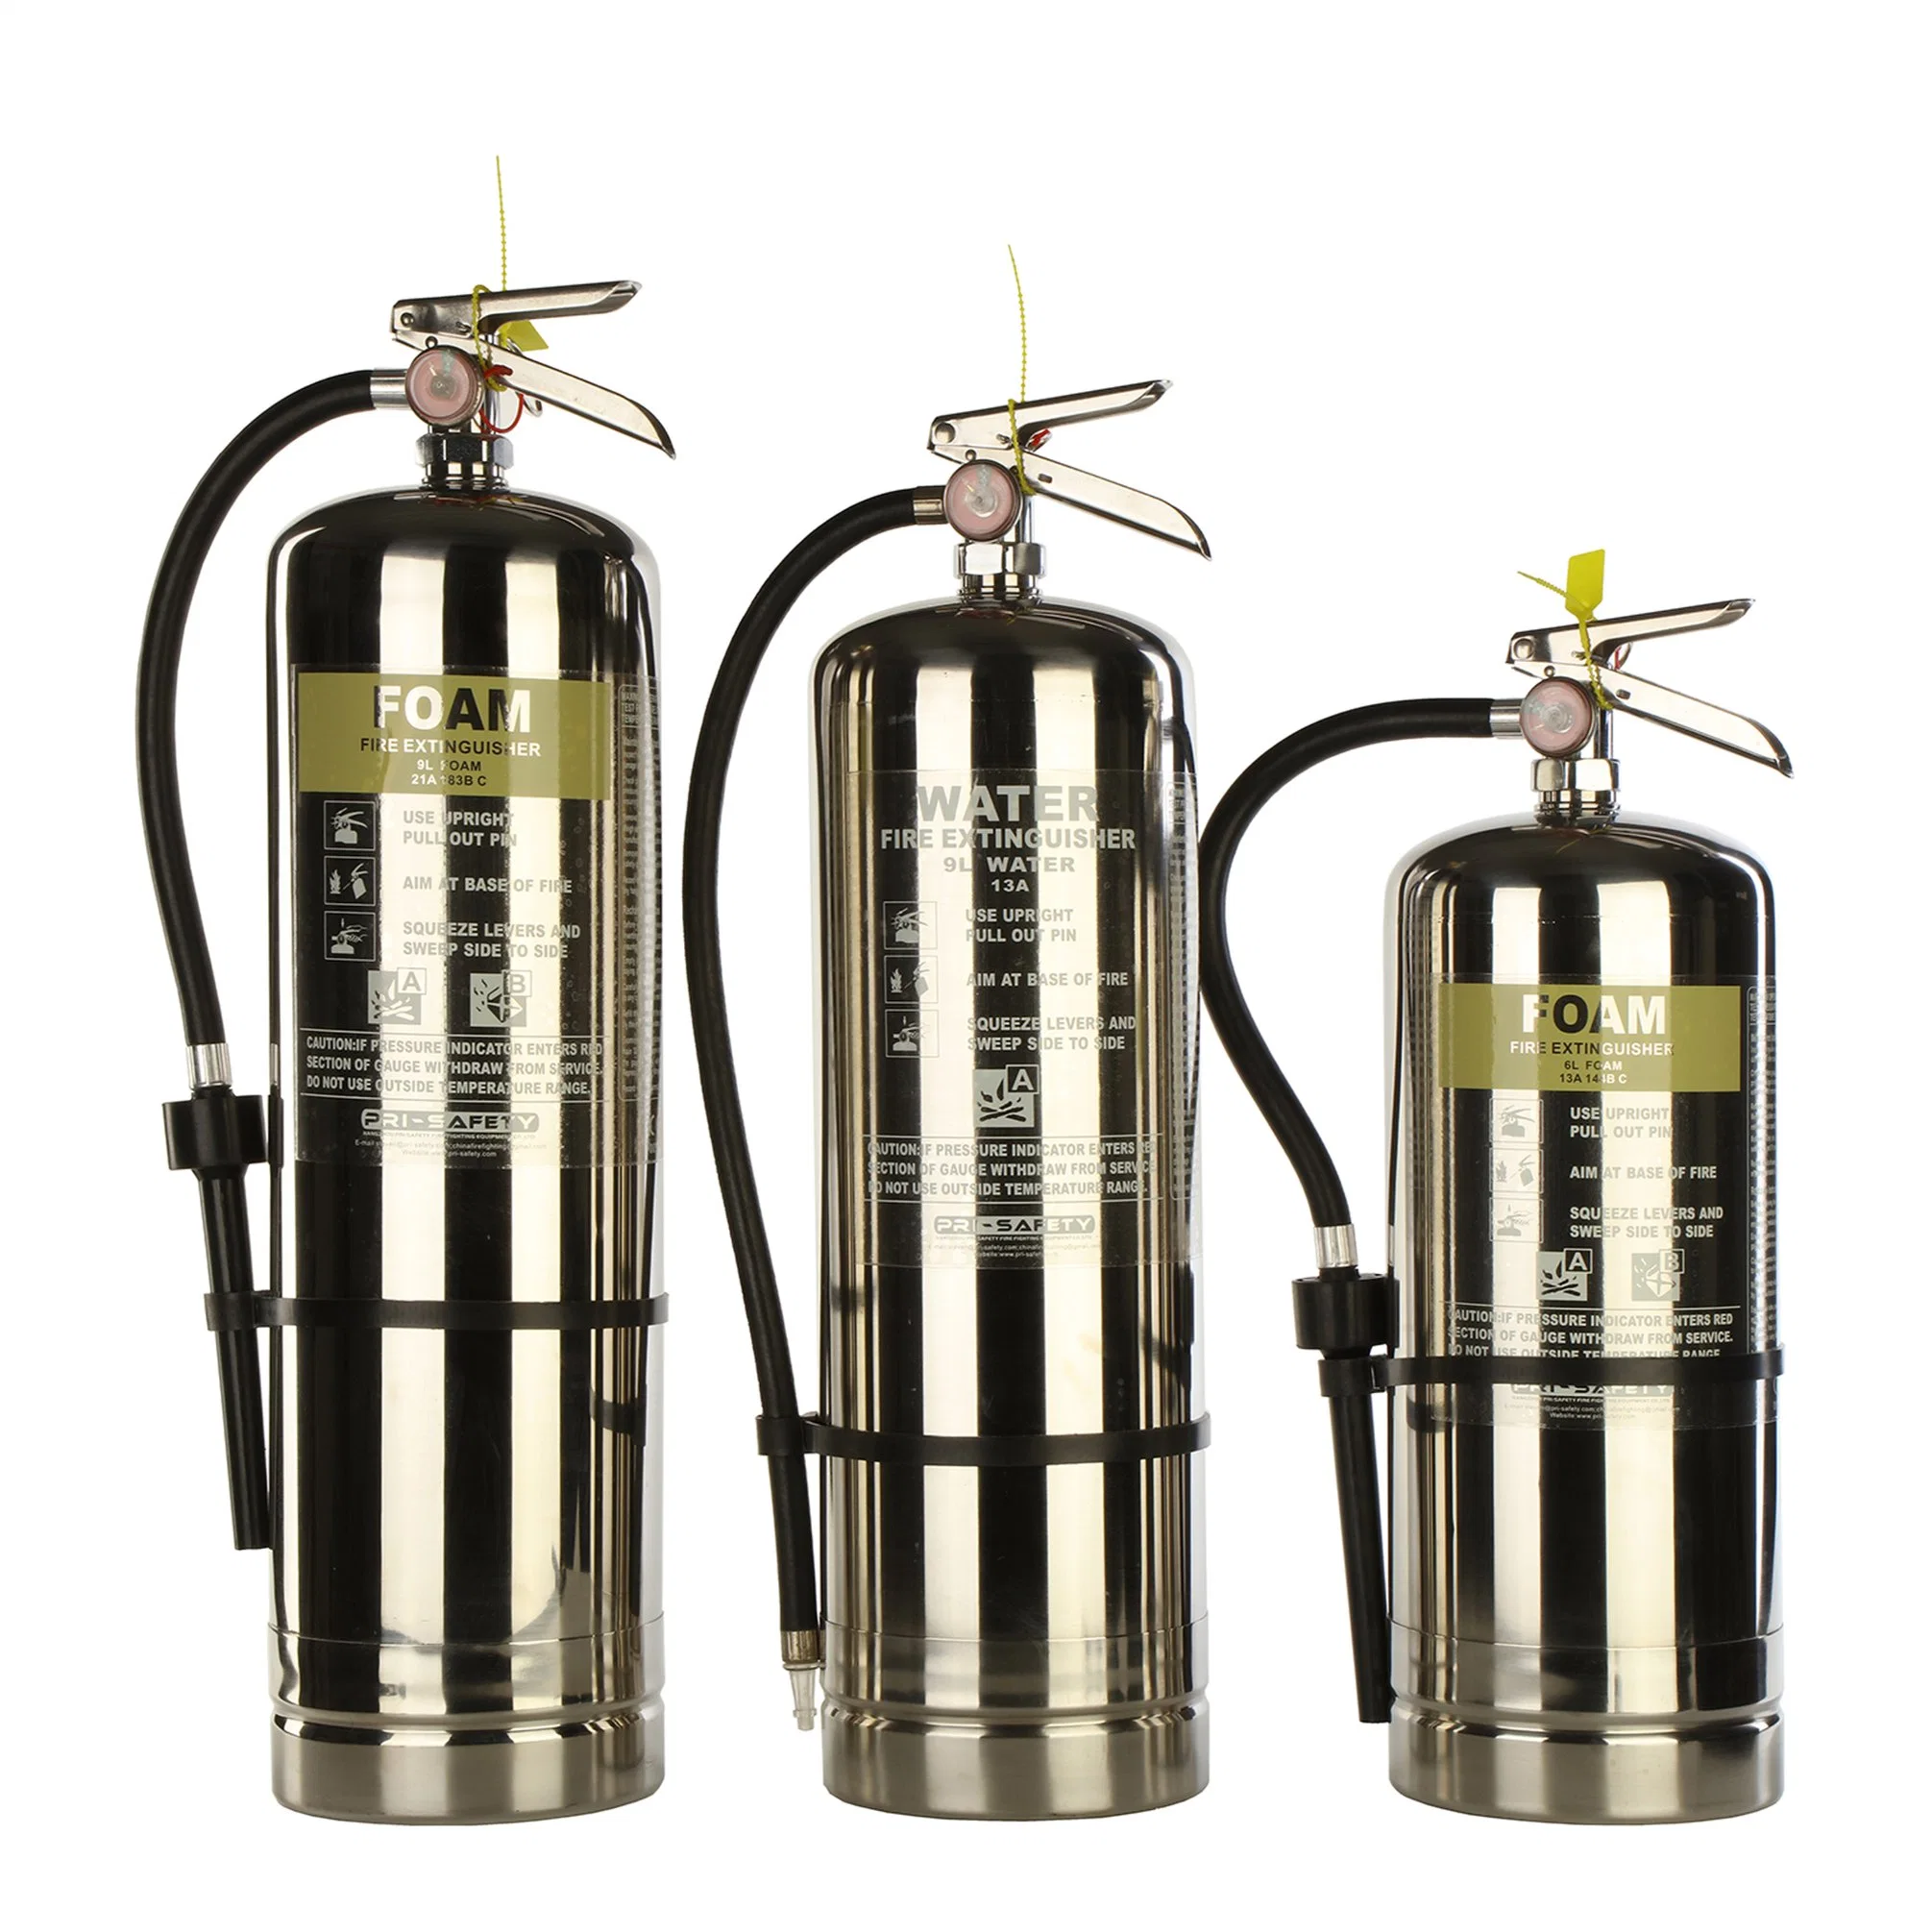 SUS304 Portable Stainless Steel Fire Extinguisher